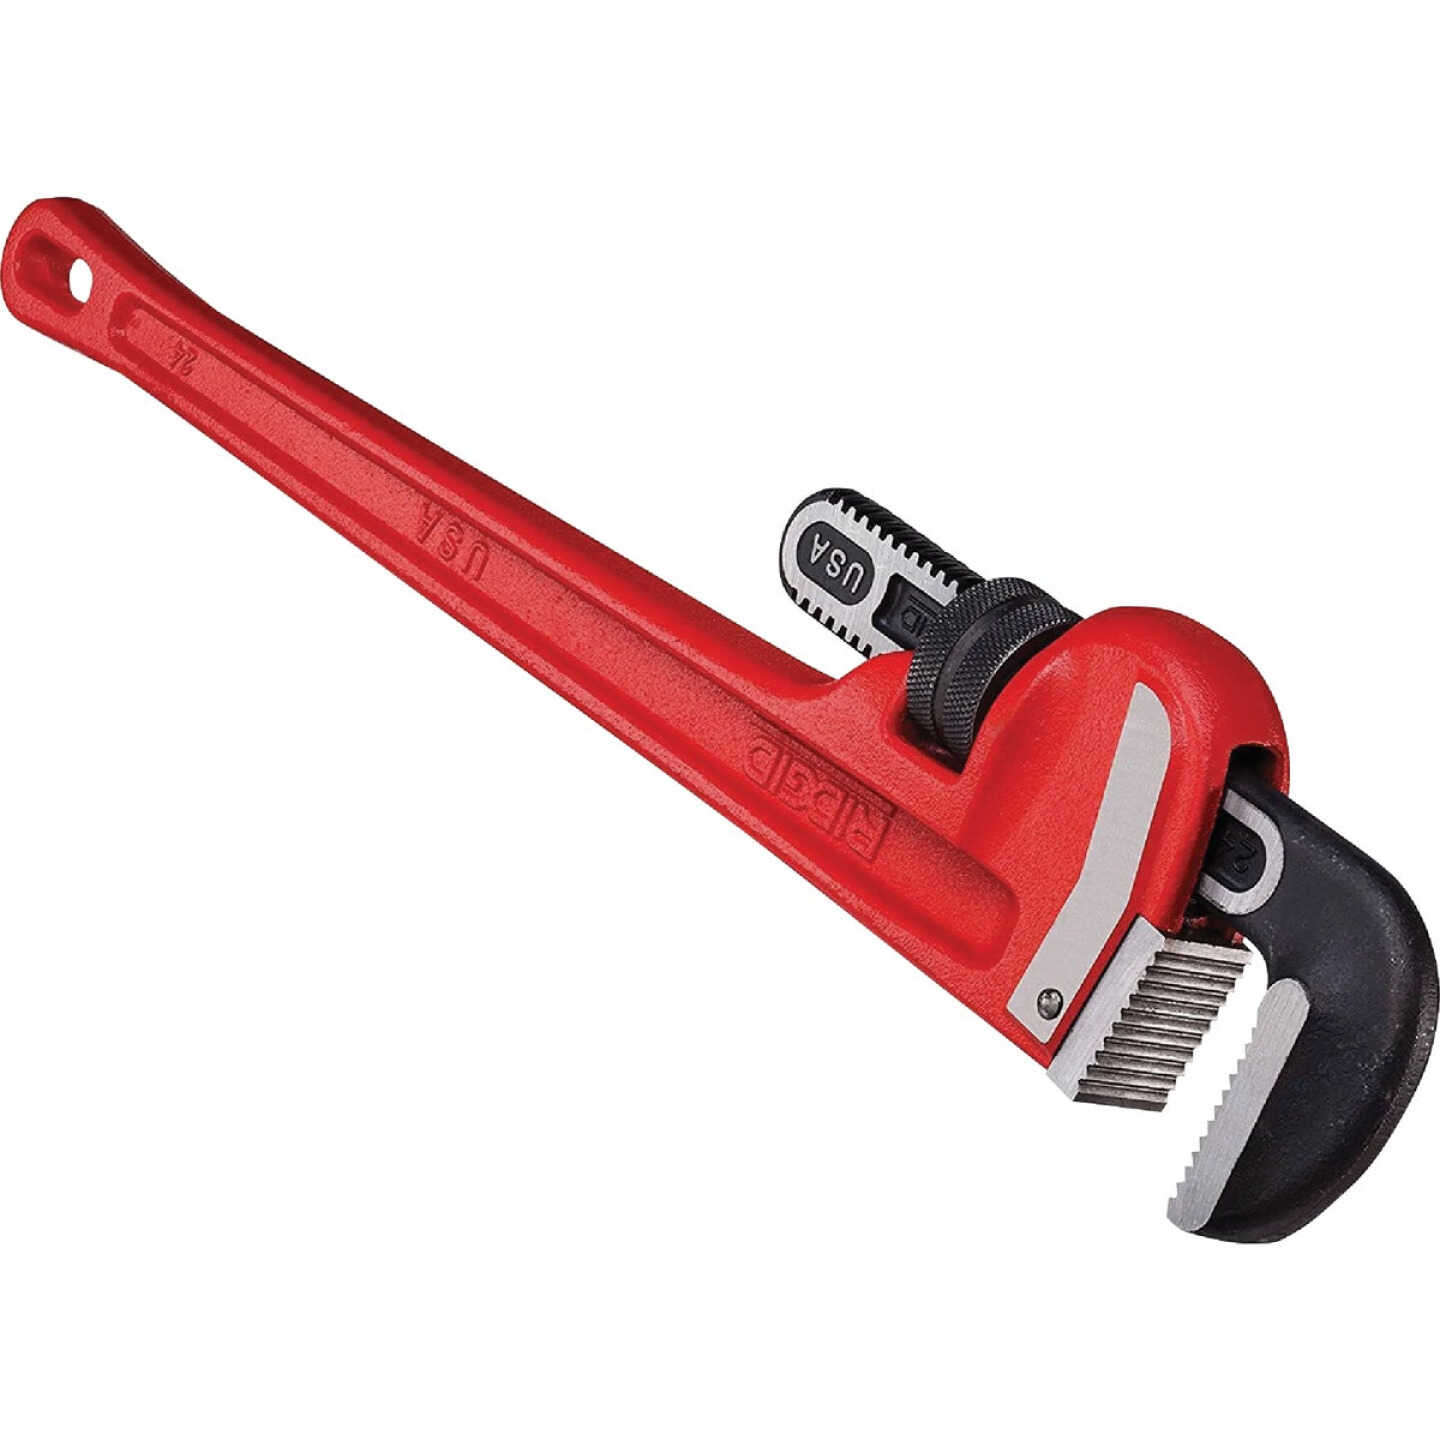 RIDGID 31000 Model 6 Heavy-Duty Plumbing Straight 6 Pipe Wrench, Red, Made  in the USA